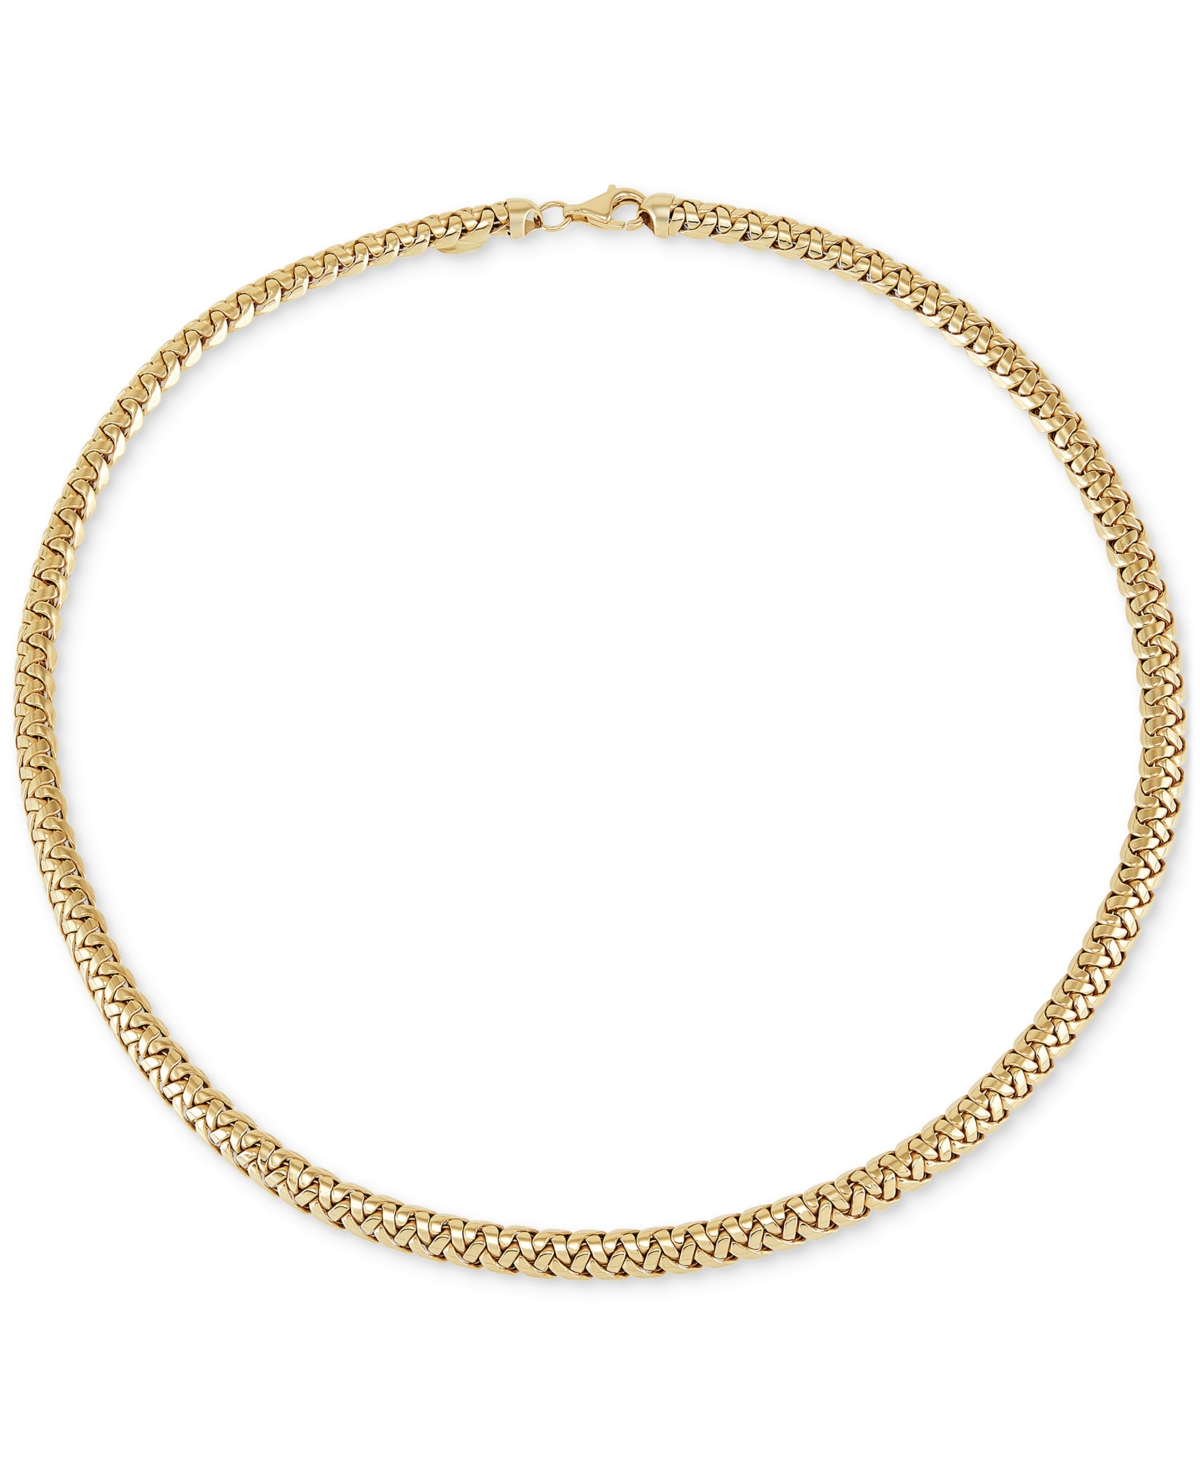 Italian Gold Polished Woven Link 17" Chain Necklace In 14k Gold In Yellow Gold